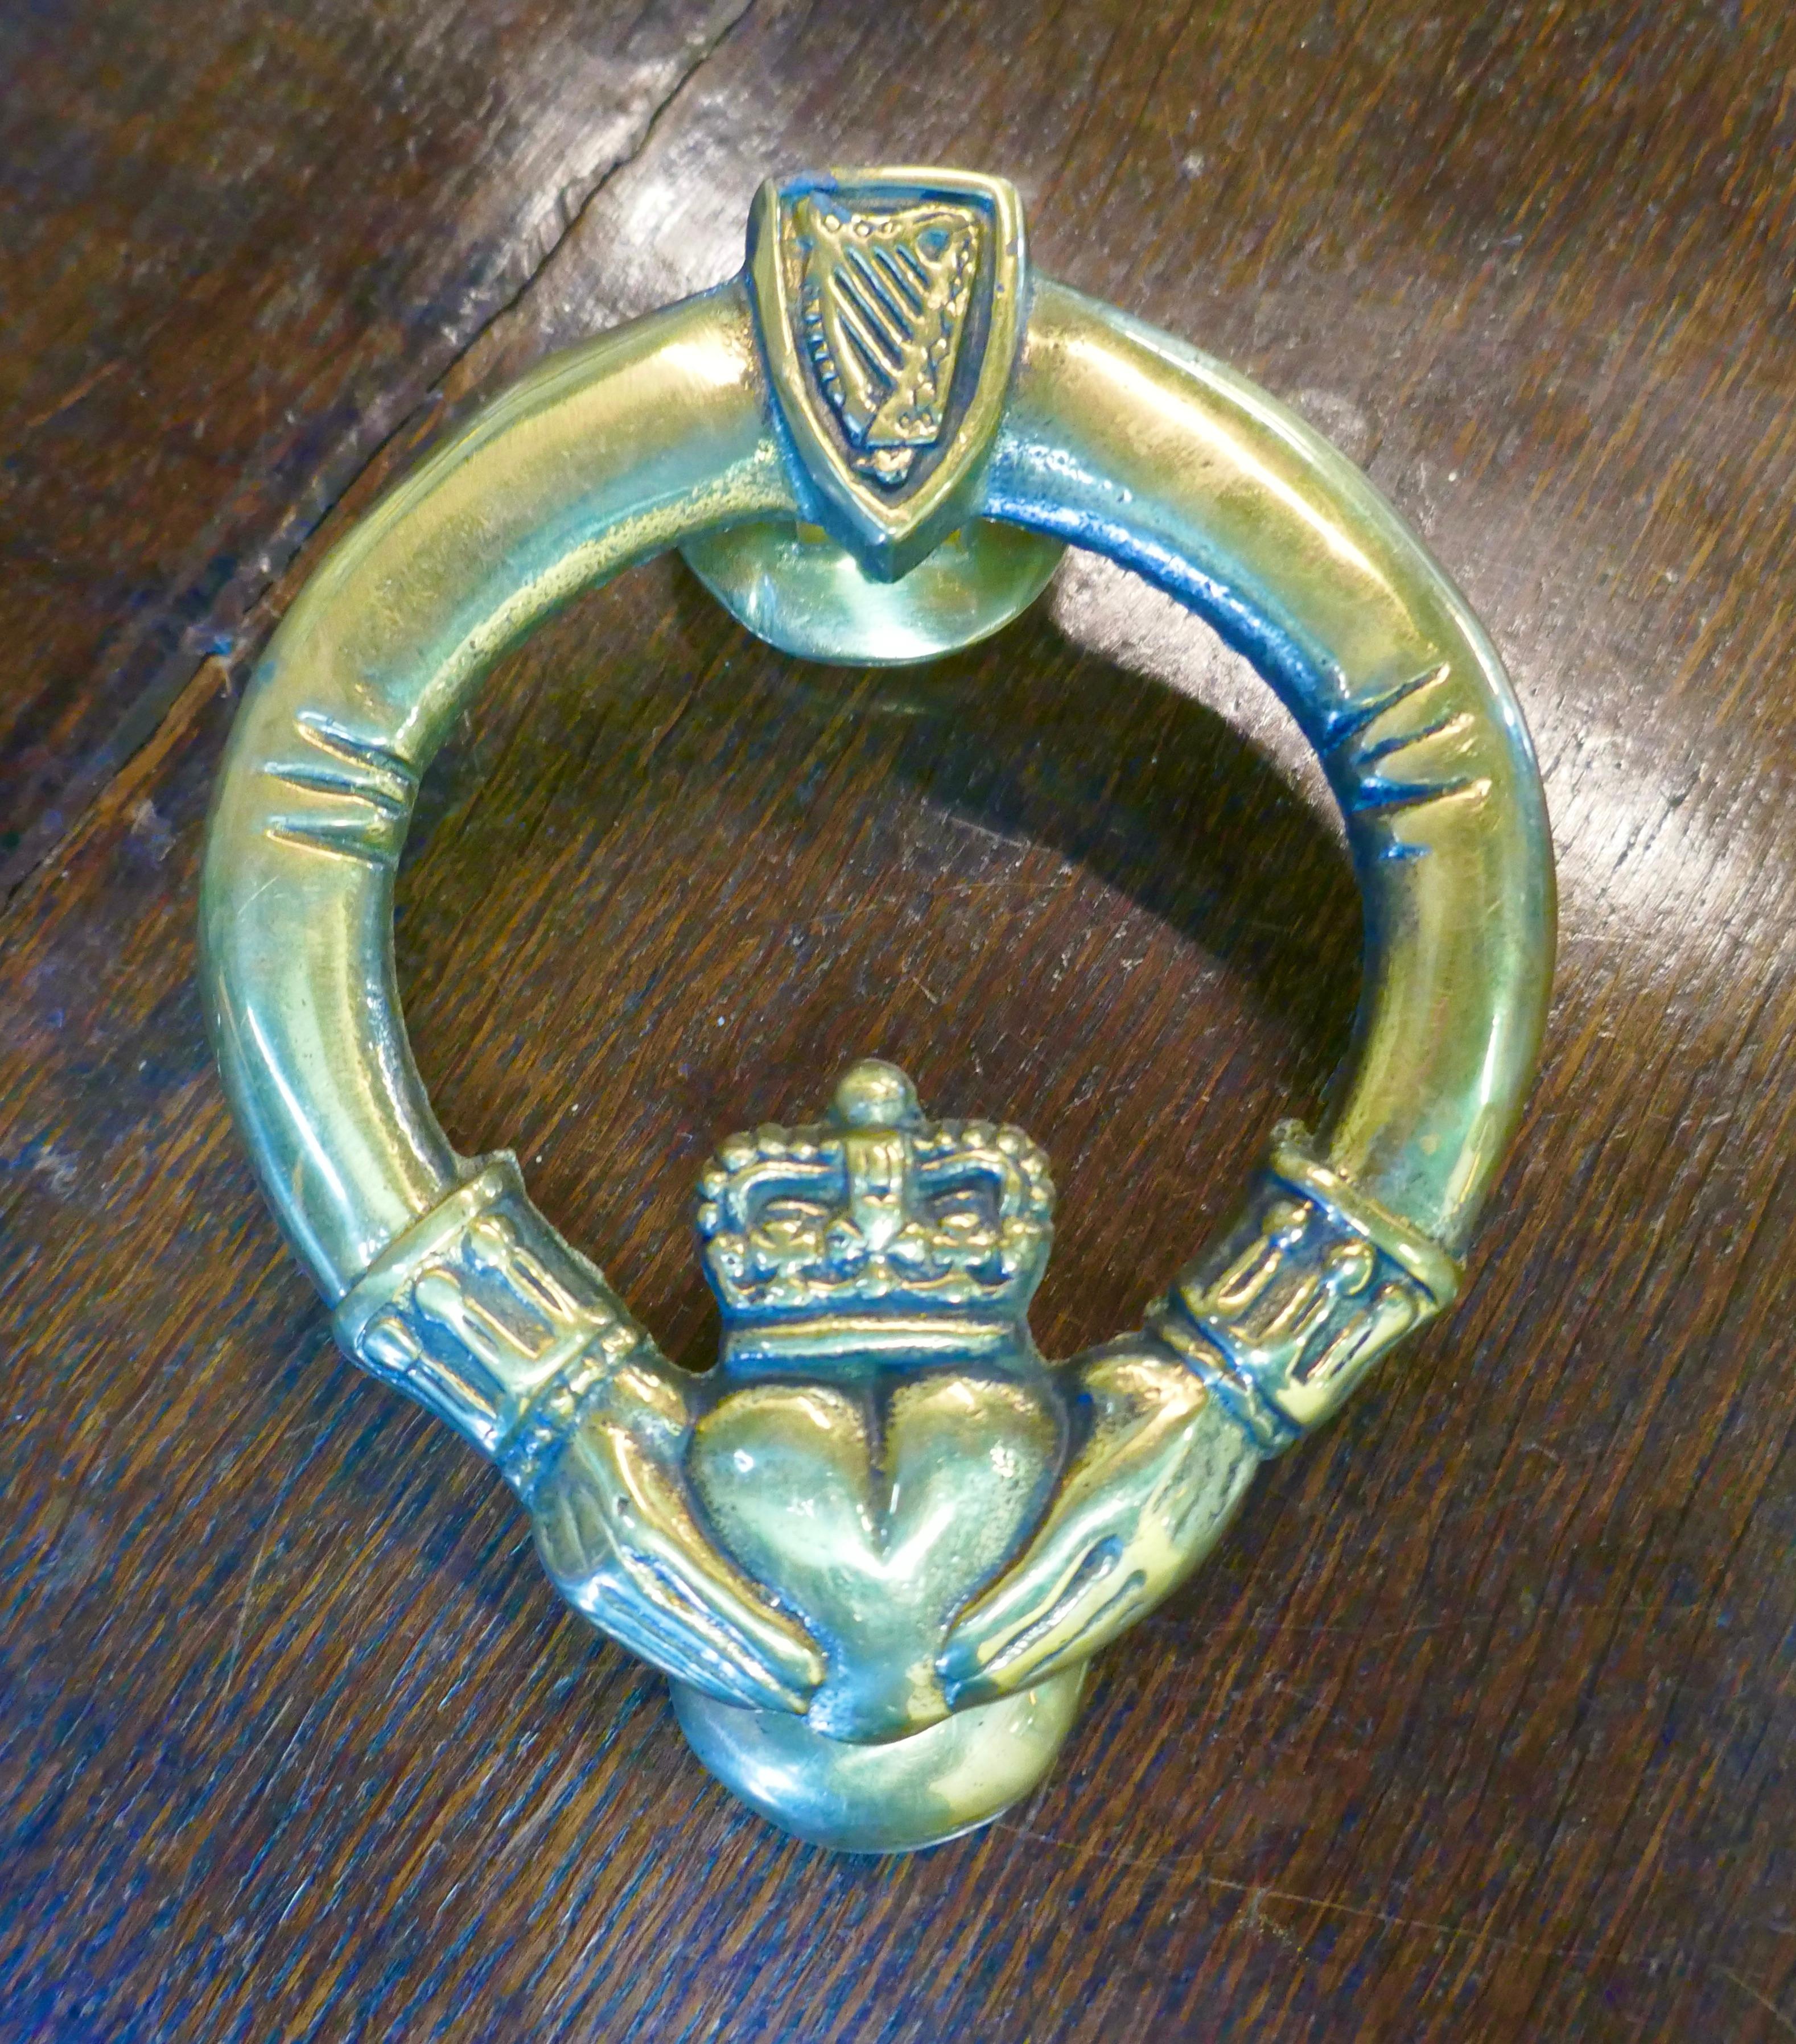 1950s vintage Irish Celtic Claddah brass door knocker.

A Traditional Celtic design with a centre heart and an Irish harp at the top
The Claddah symbol originated in Ireland the knocker is in good condition, it comes with new threaded fixings and